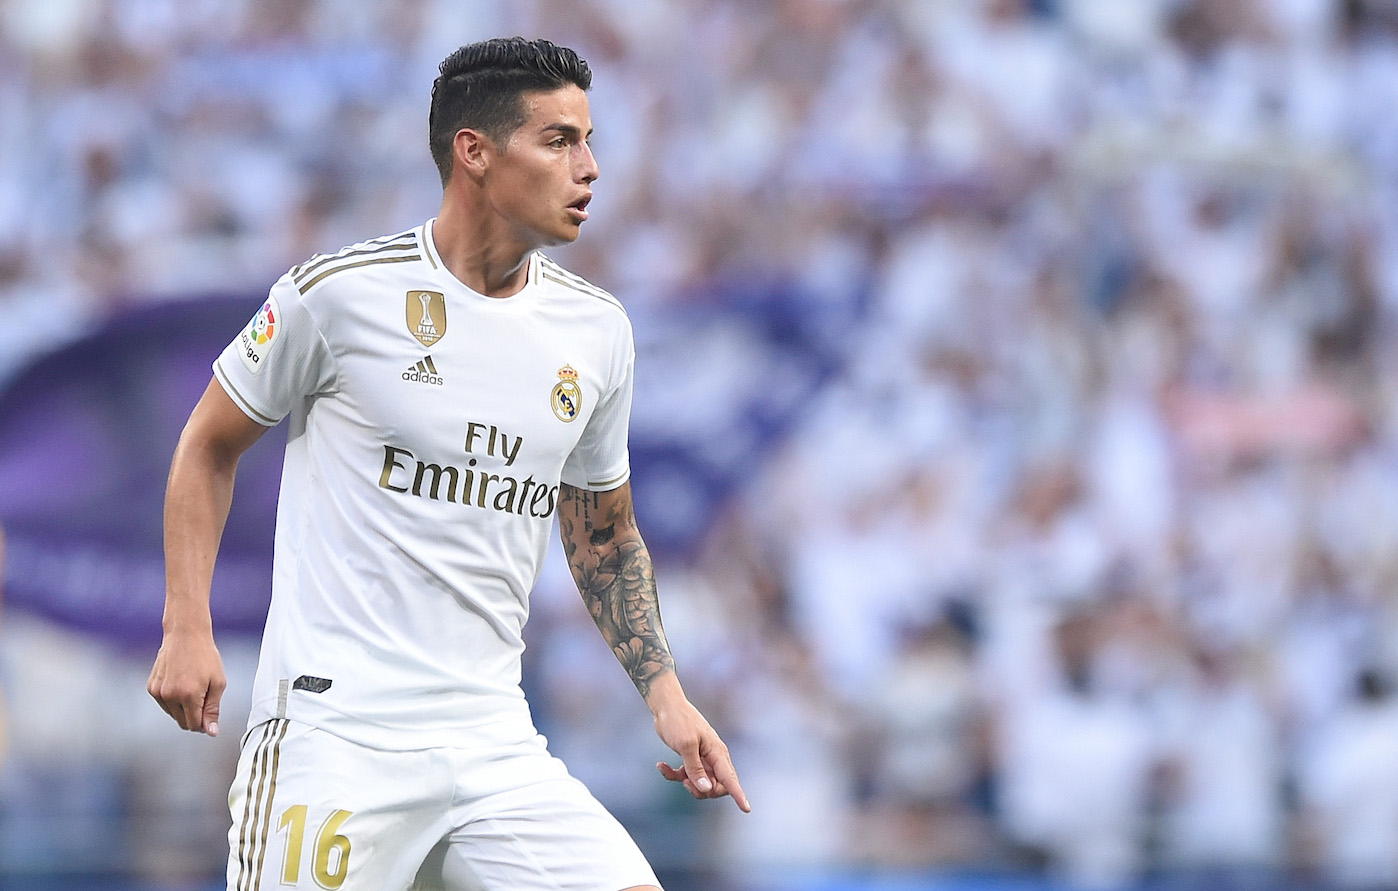 CorSport: Boban to meet Real Madrid to discuss James Rodriguez deal